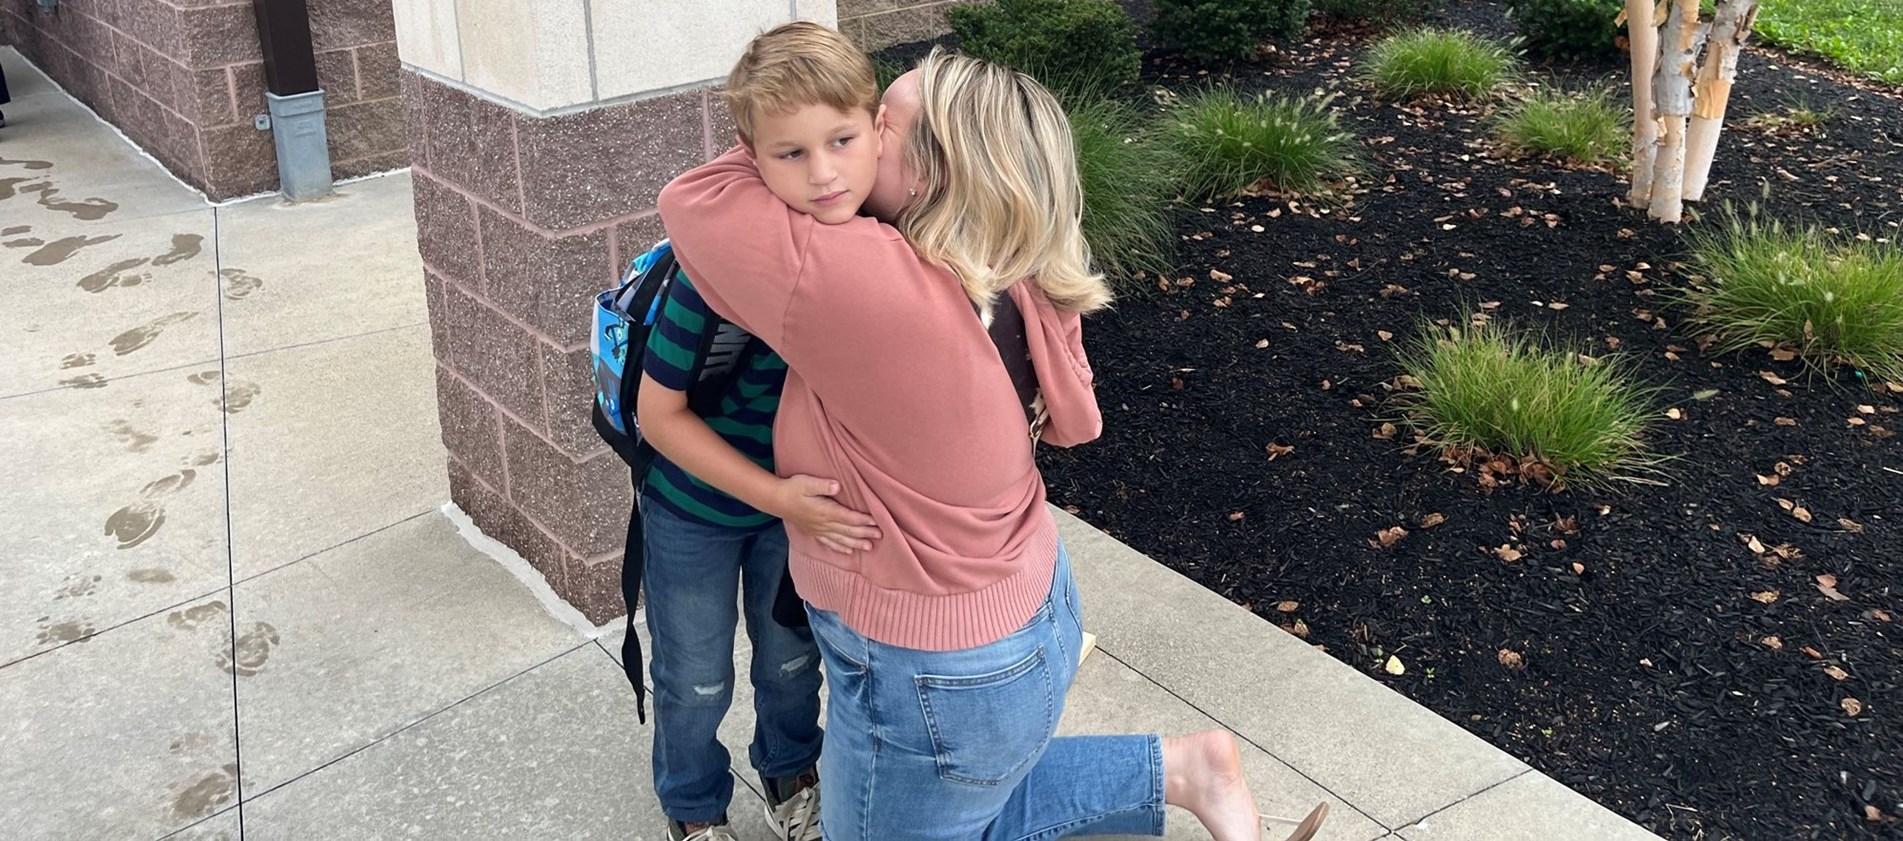 Parent Hugs Child on First Day of School Year 2023-24 before student enters building